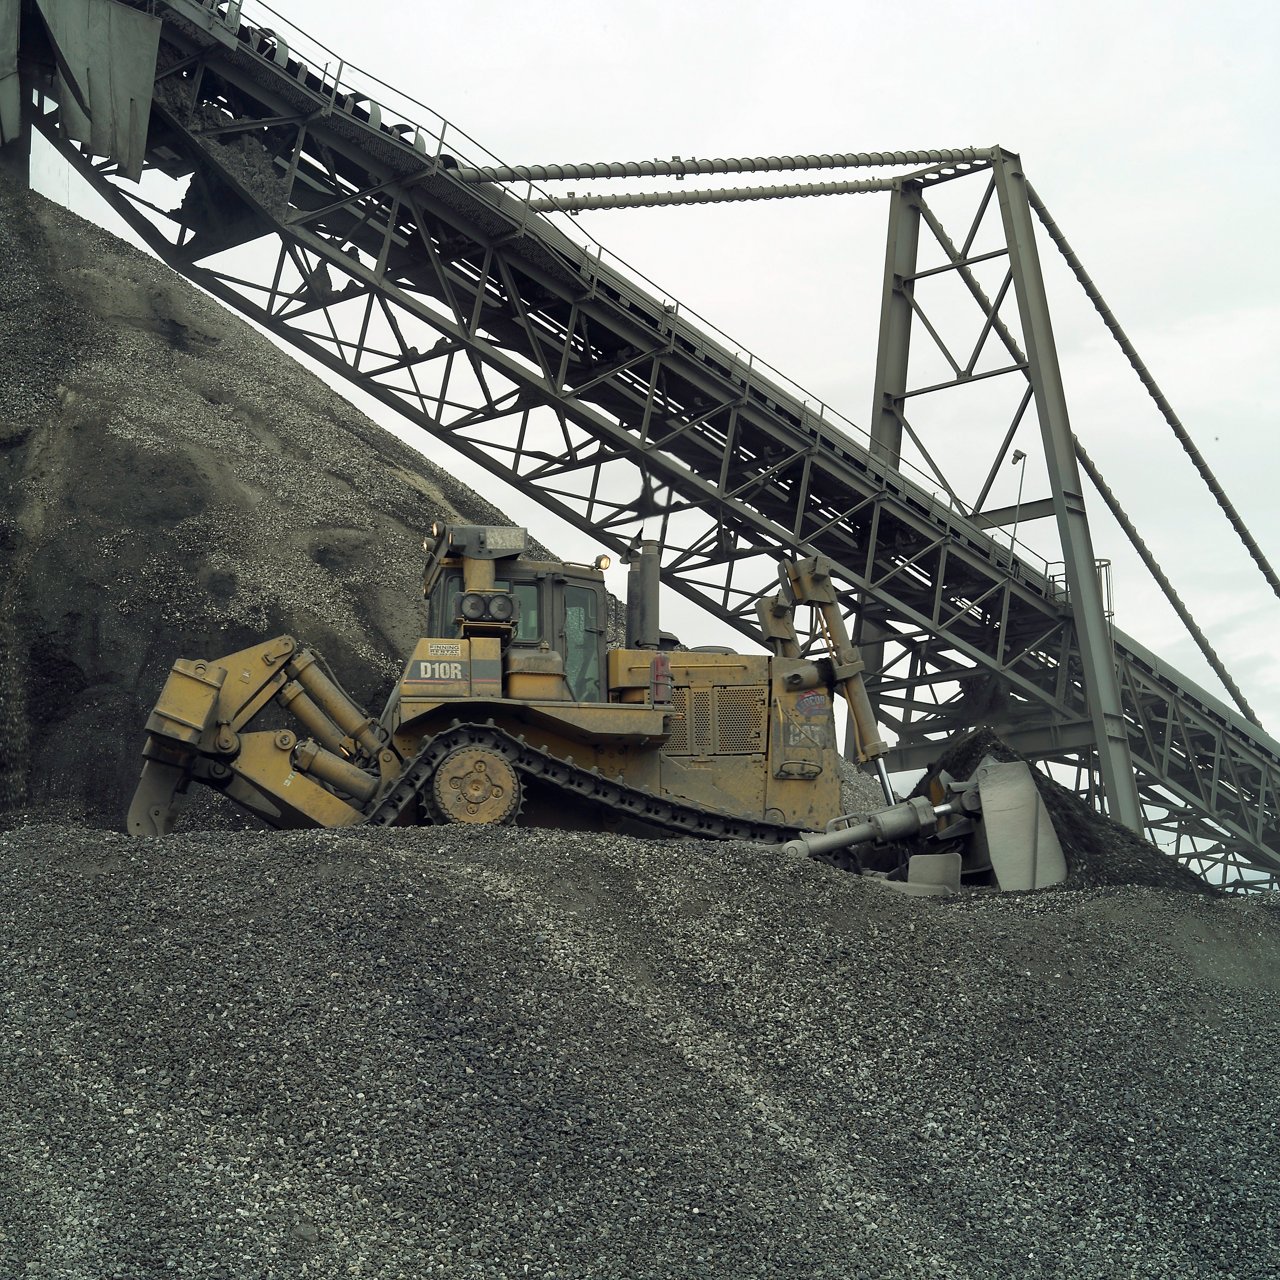 Bulldozer with mining equipment on site.